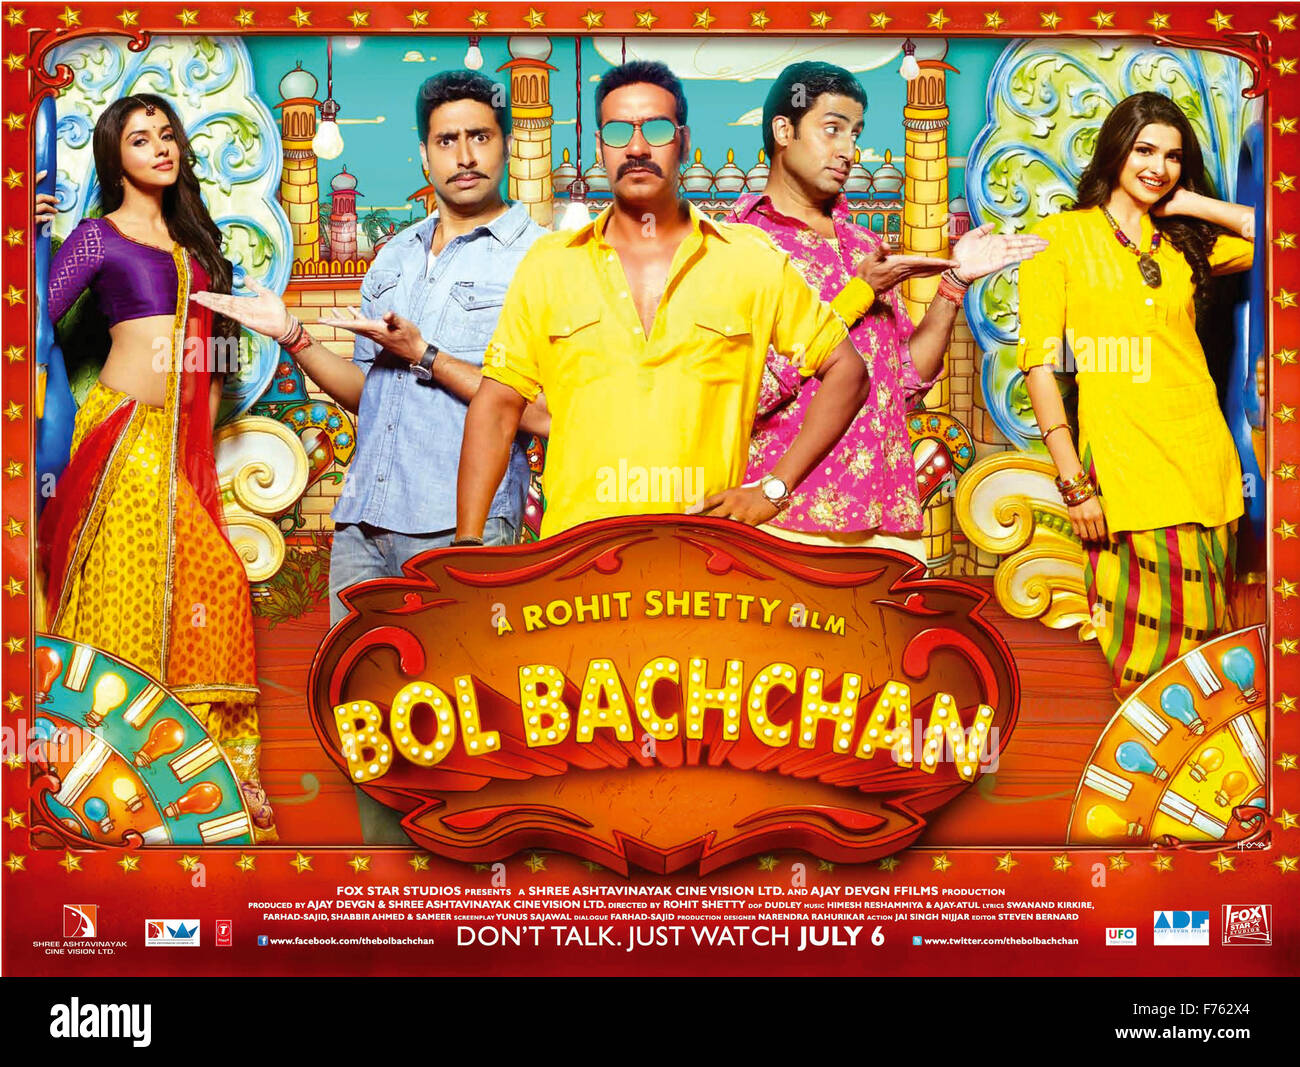 Indian bollywood Hindi film movie poster of Bol Bachchan a Rohit Shetty film  India Stock Photo - Alamy